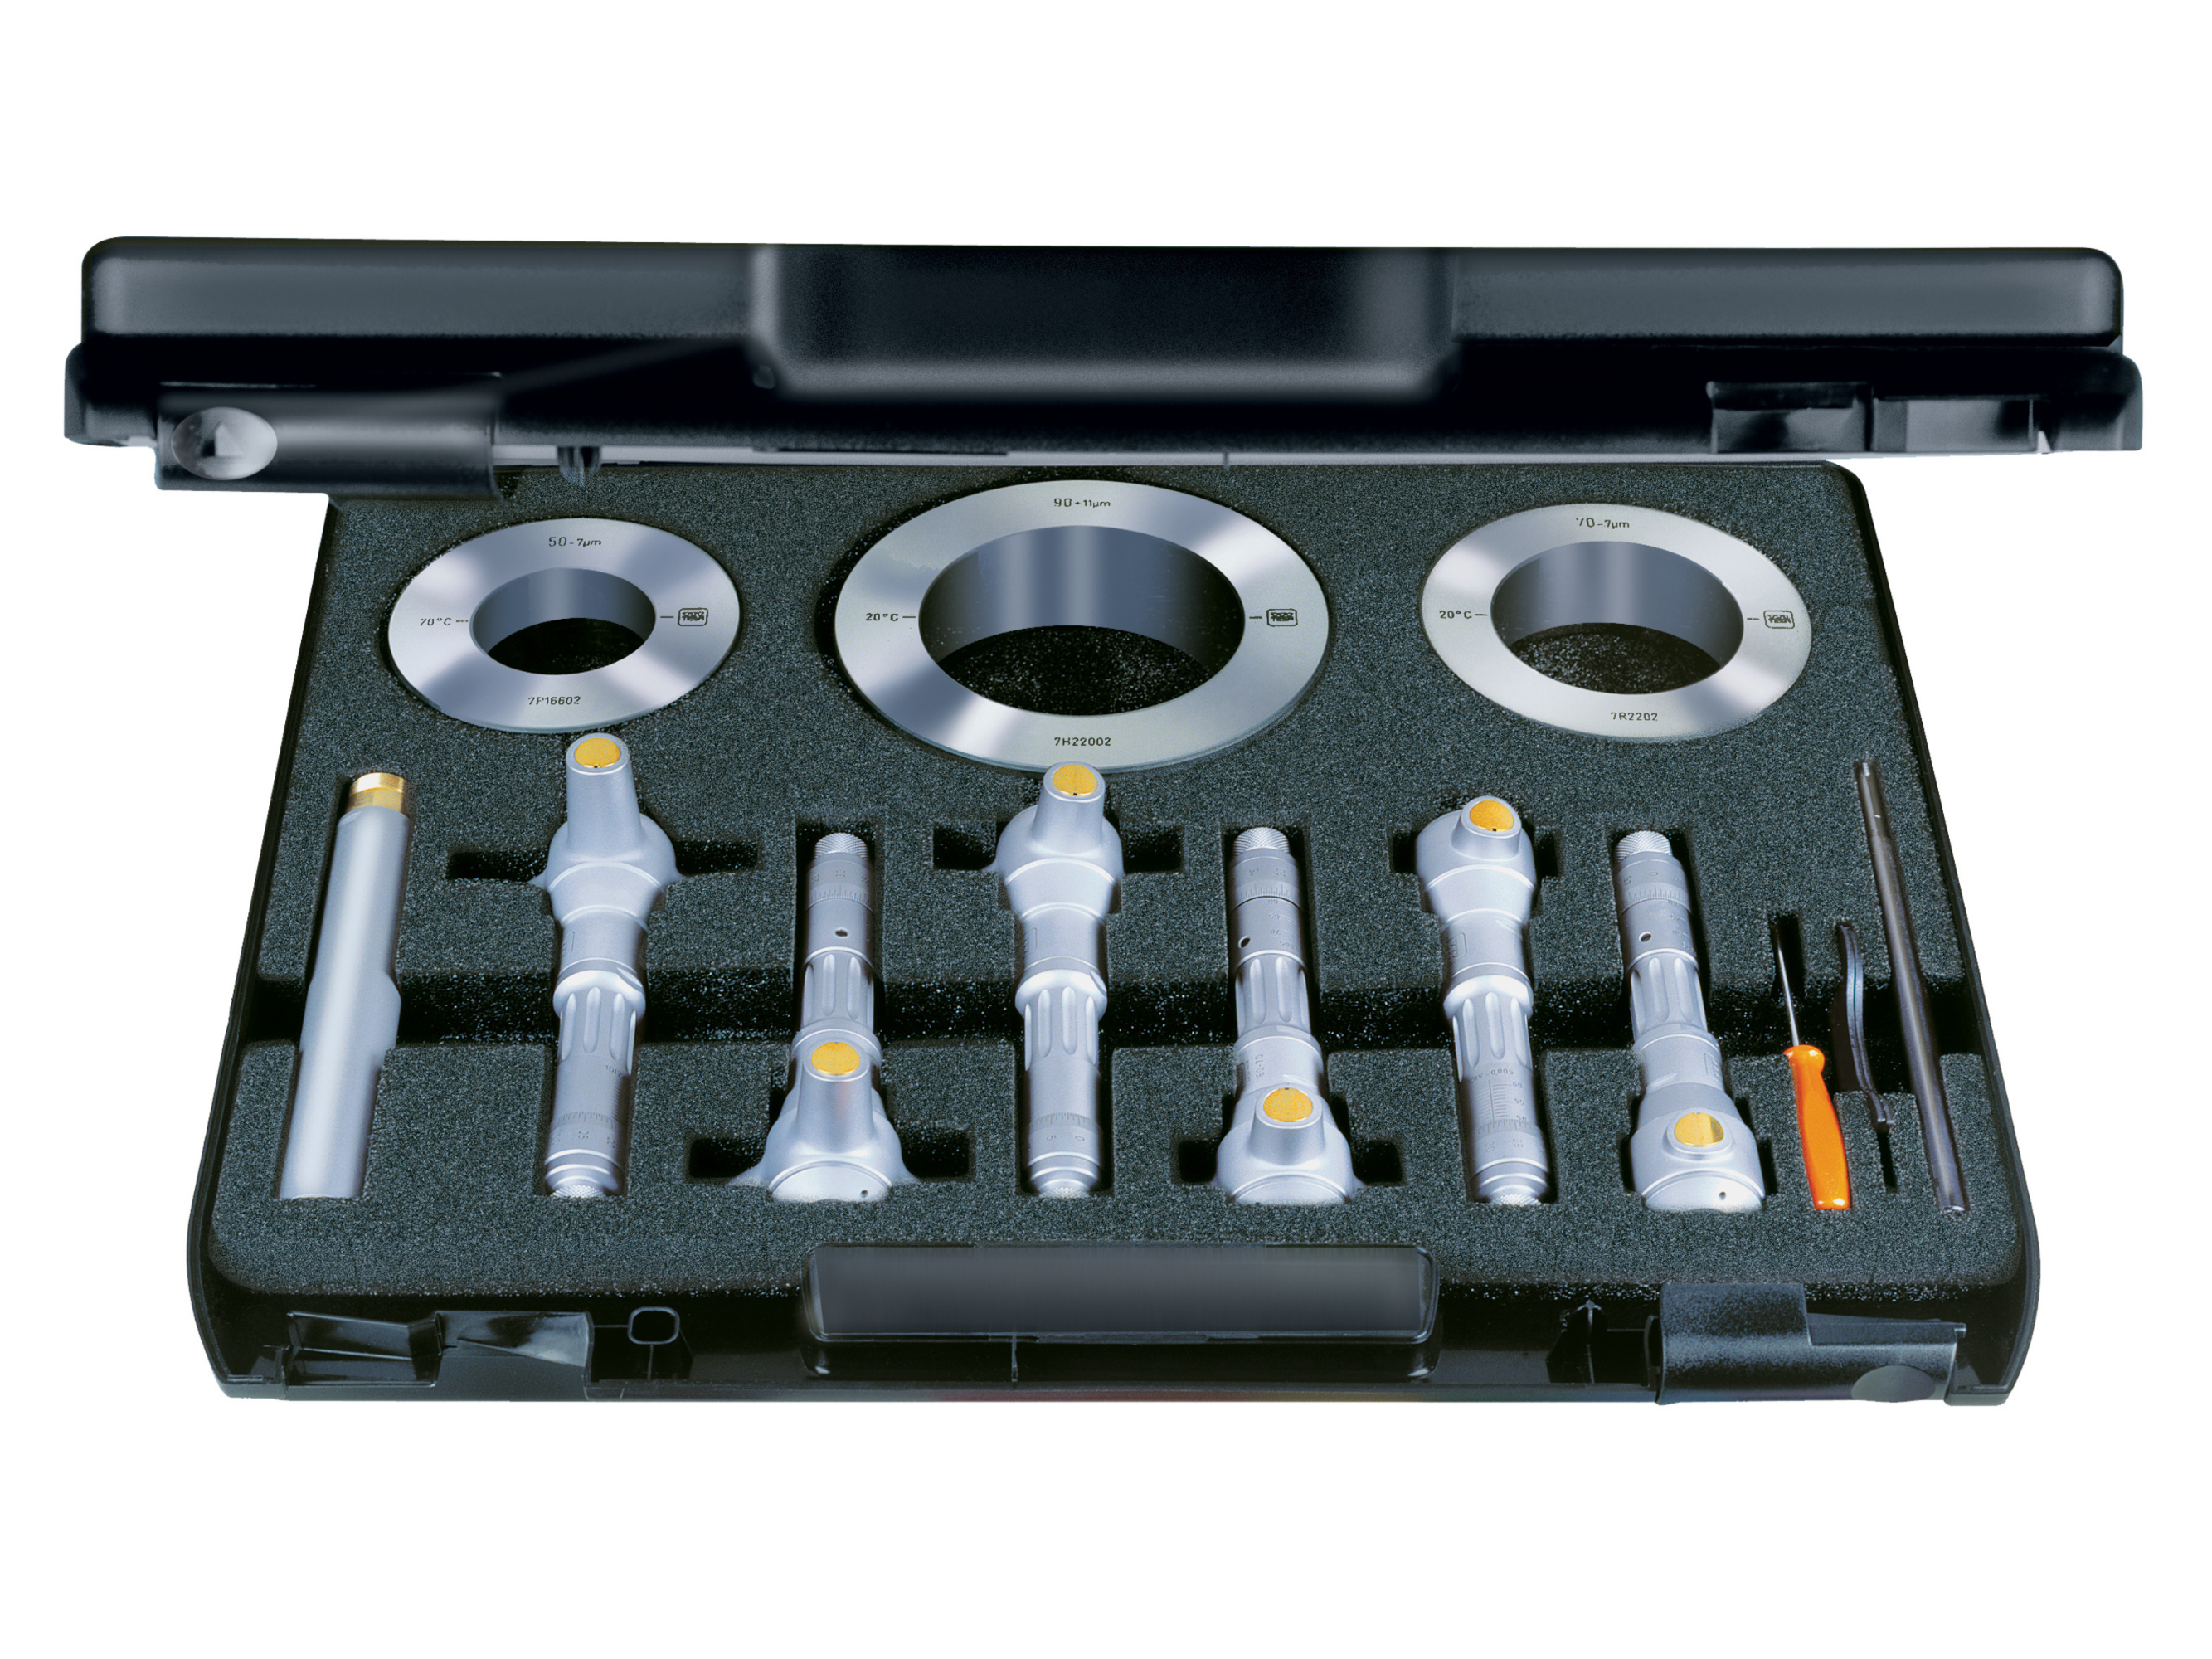 Tesa Analogue internal micrometers - Complete Set - Imperial